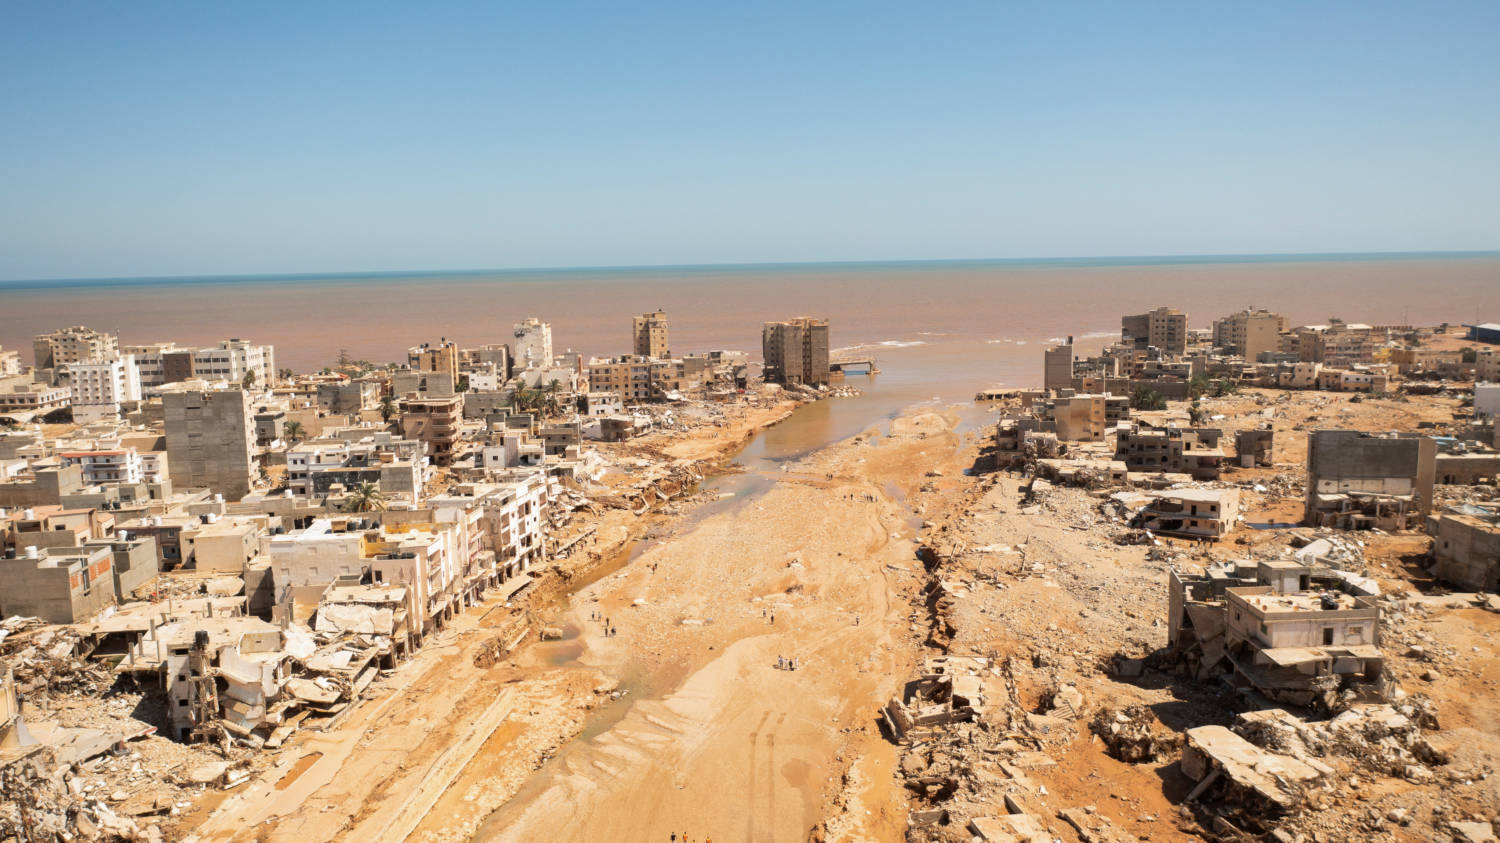 Aftermath Of The Floods In Derna